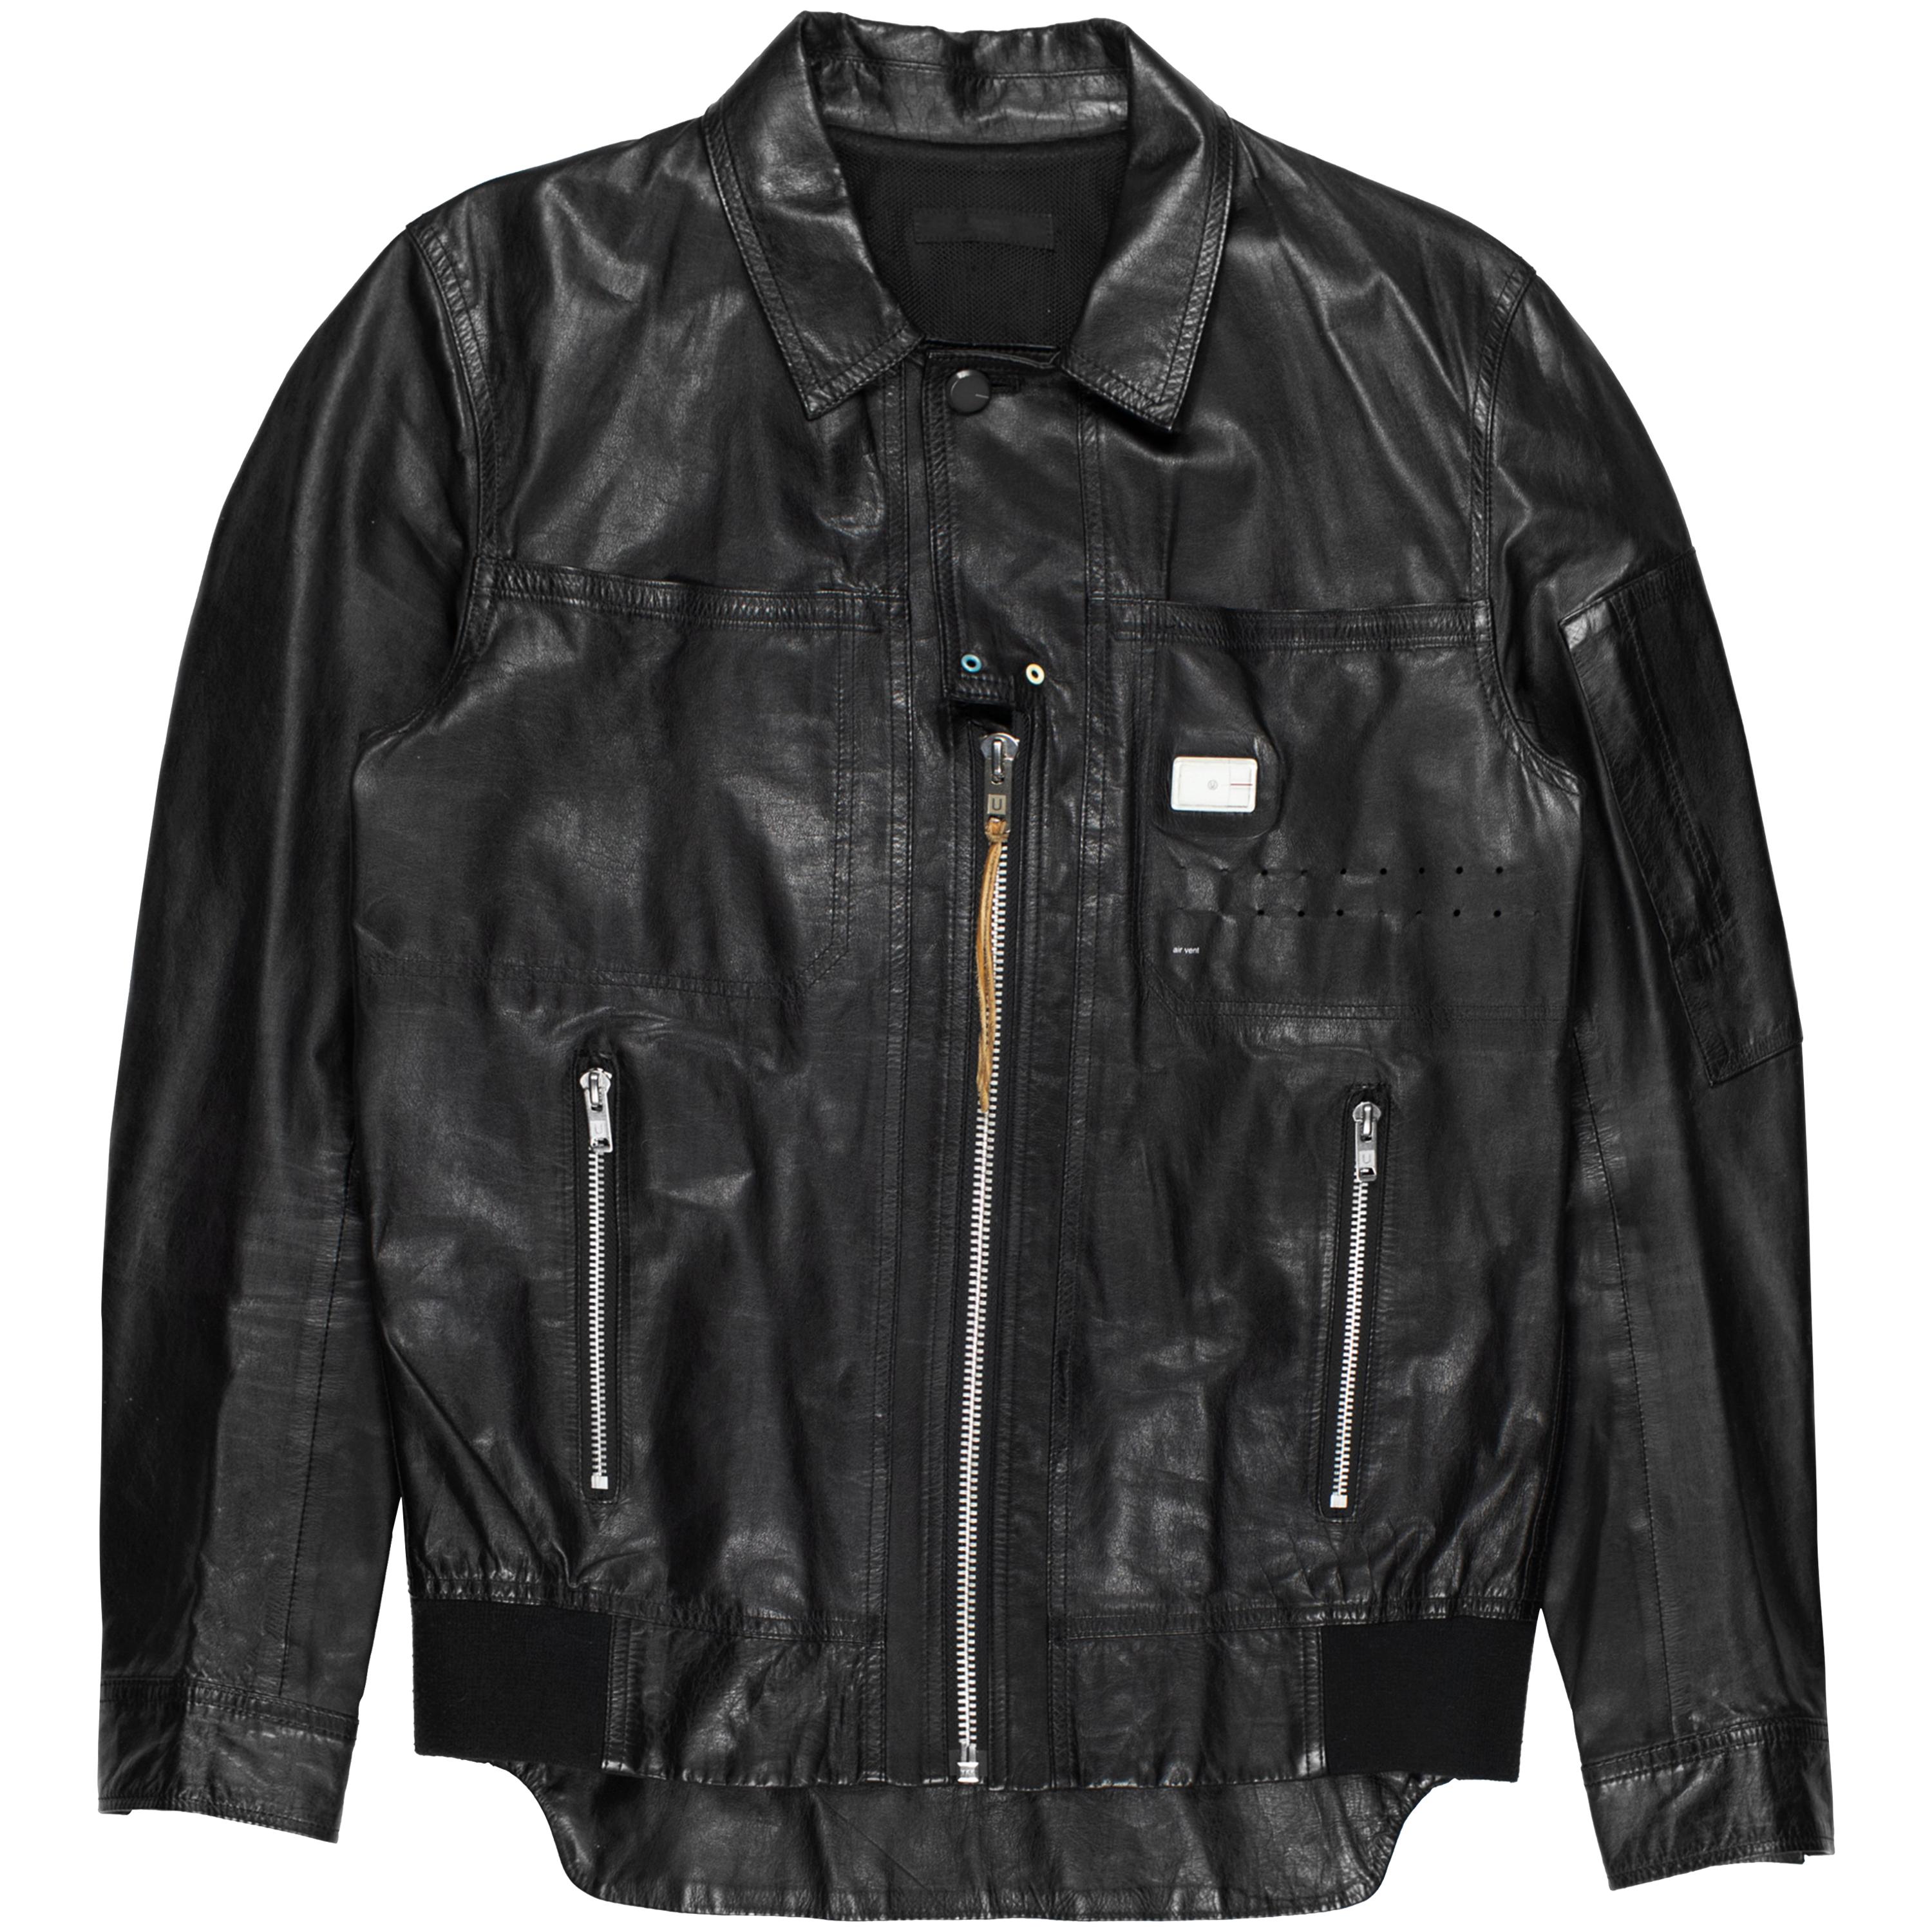 Undercover SS2010 "Less But Better" Technical Leather Jacket